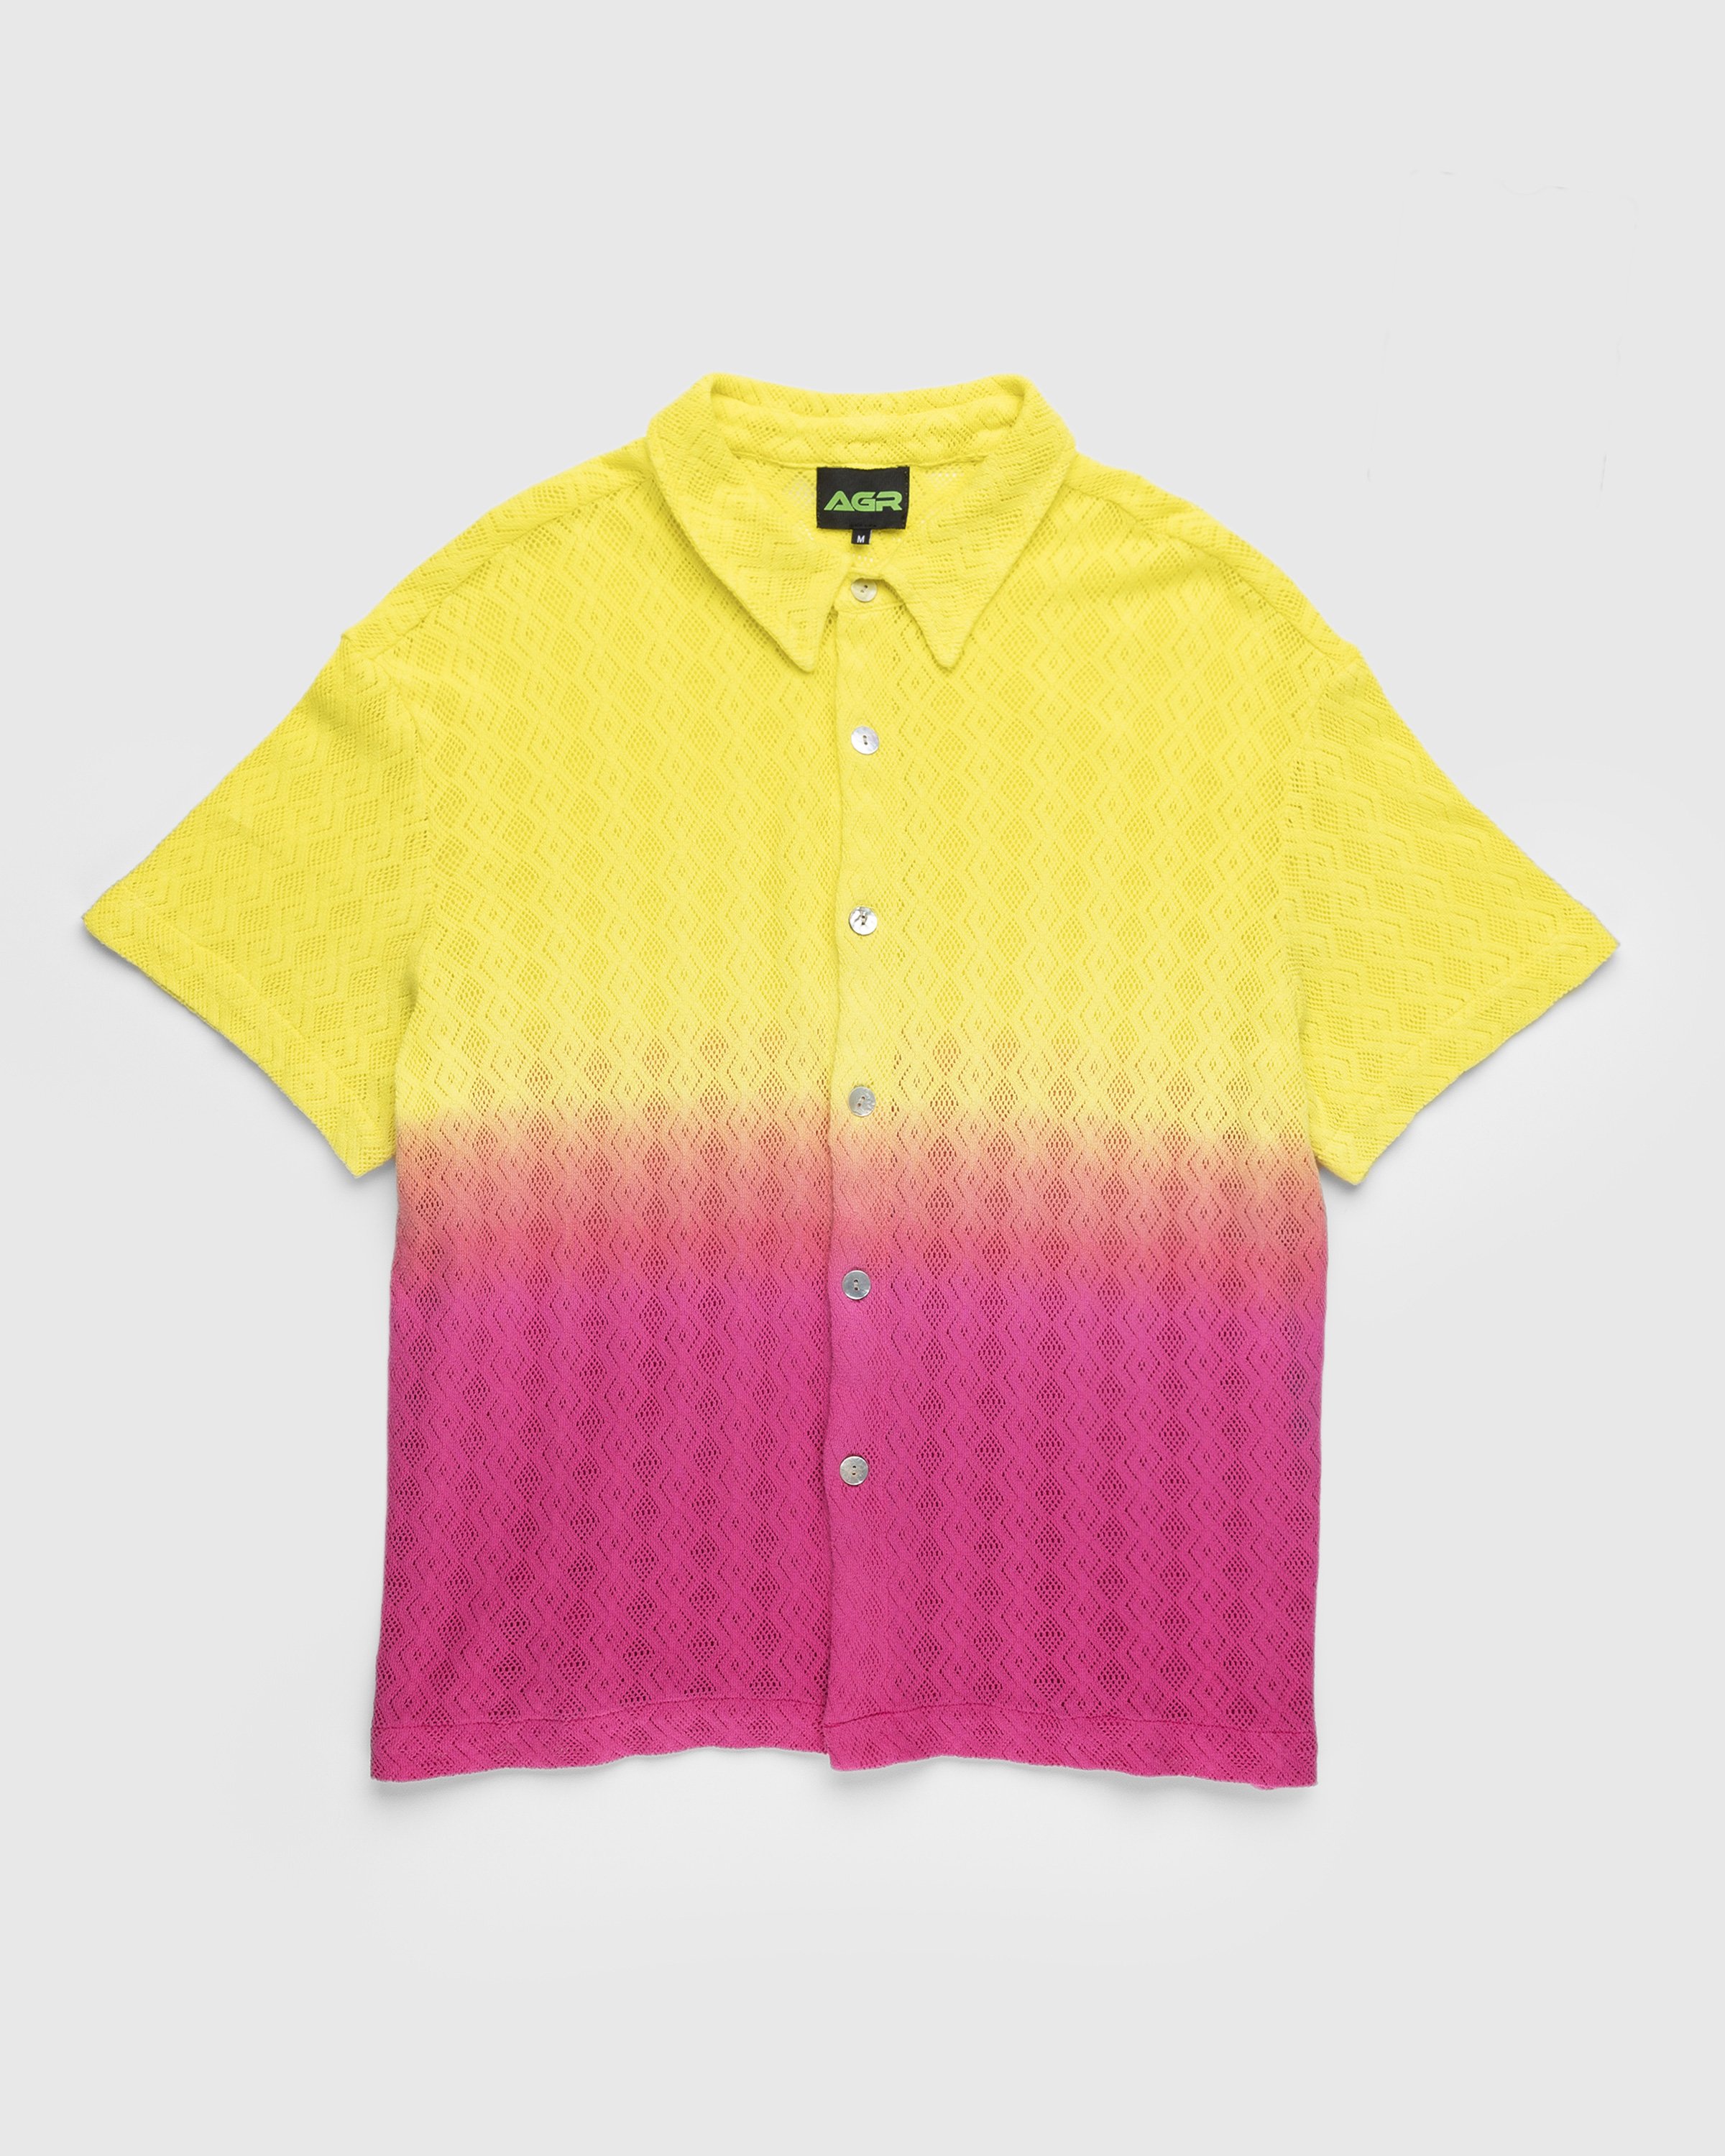 AGR - Gentle Happiness Lace Shirt Yellow/Pink - Clothing - Yellow - Image 1